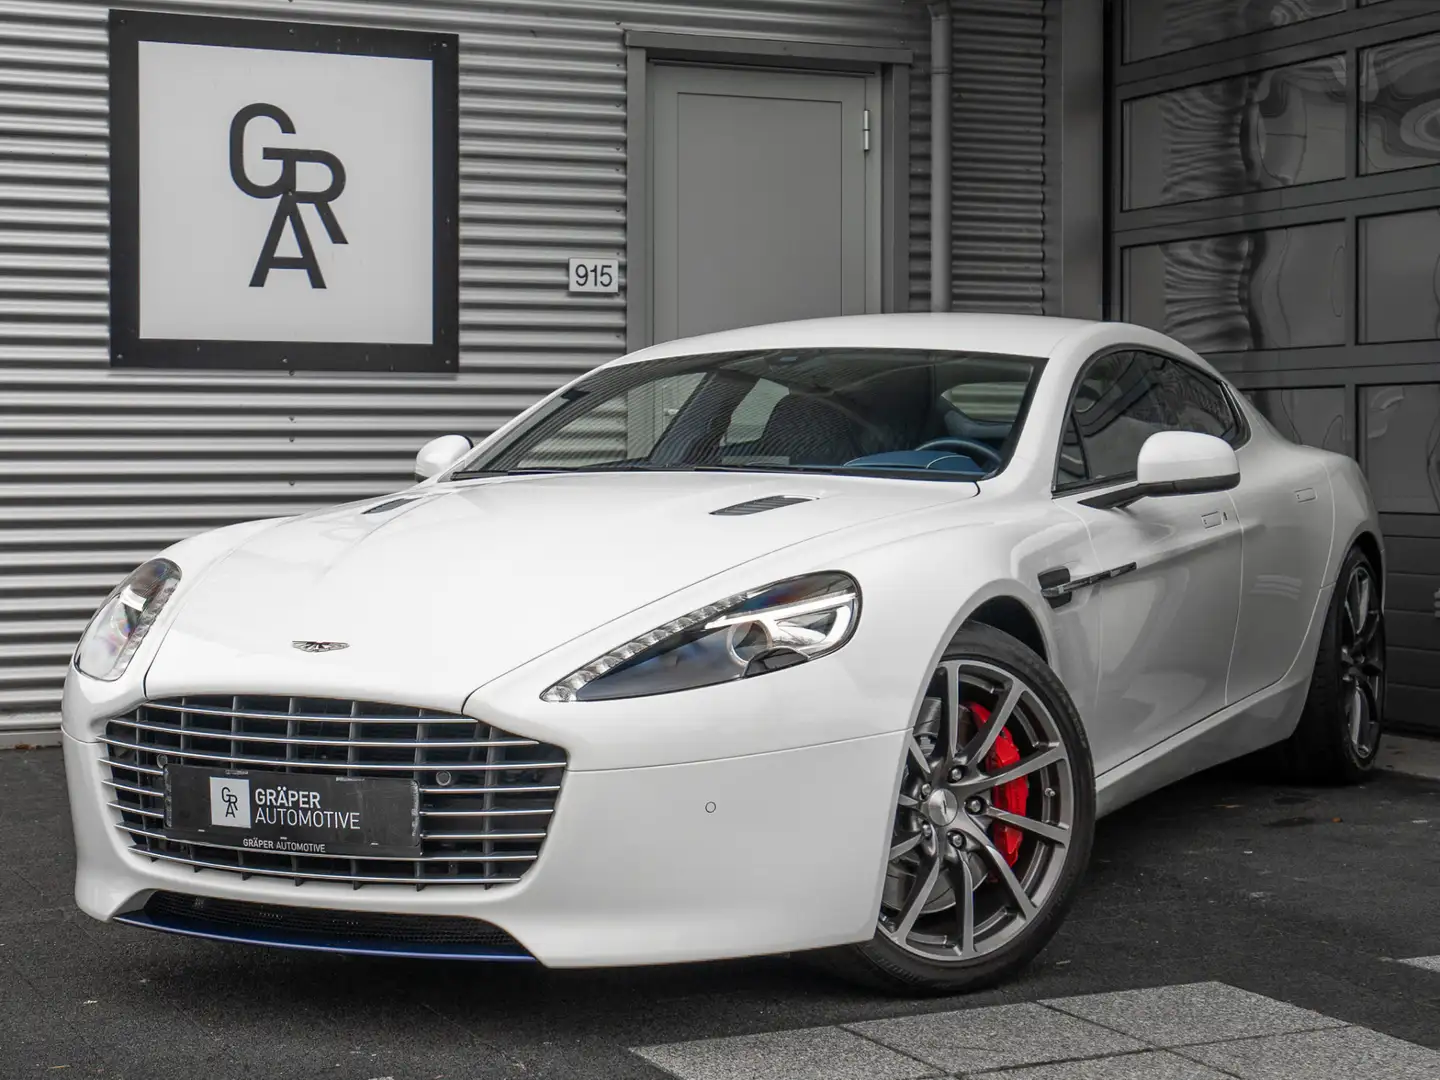 Aston Martin Rapide S 6.0 V12 ‘Britain is Great’ Edition by Q 1/8 Wit - 1